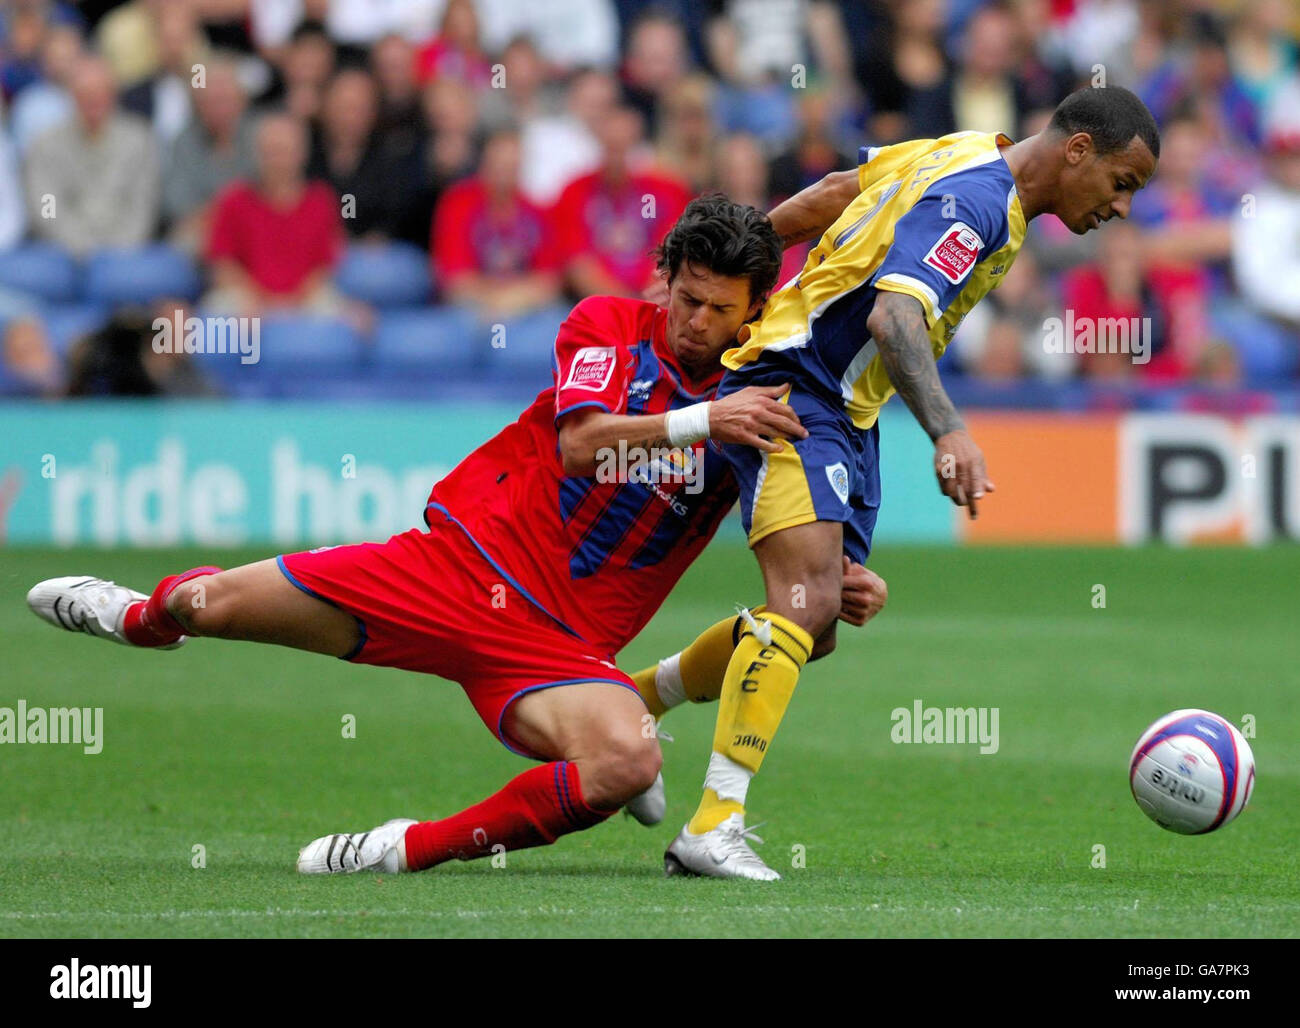 Crystal Palace's Jose Fonte (left) tackles Leicester City's DJ Campbell during the Coca-Cola Football League Championship match at Selhurst Park, London. Stock Photo